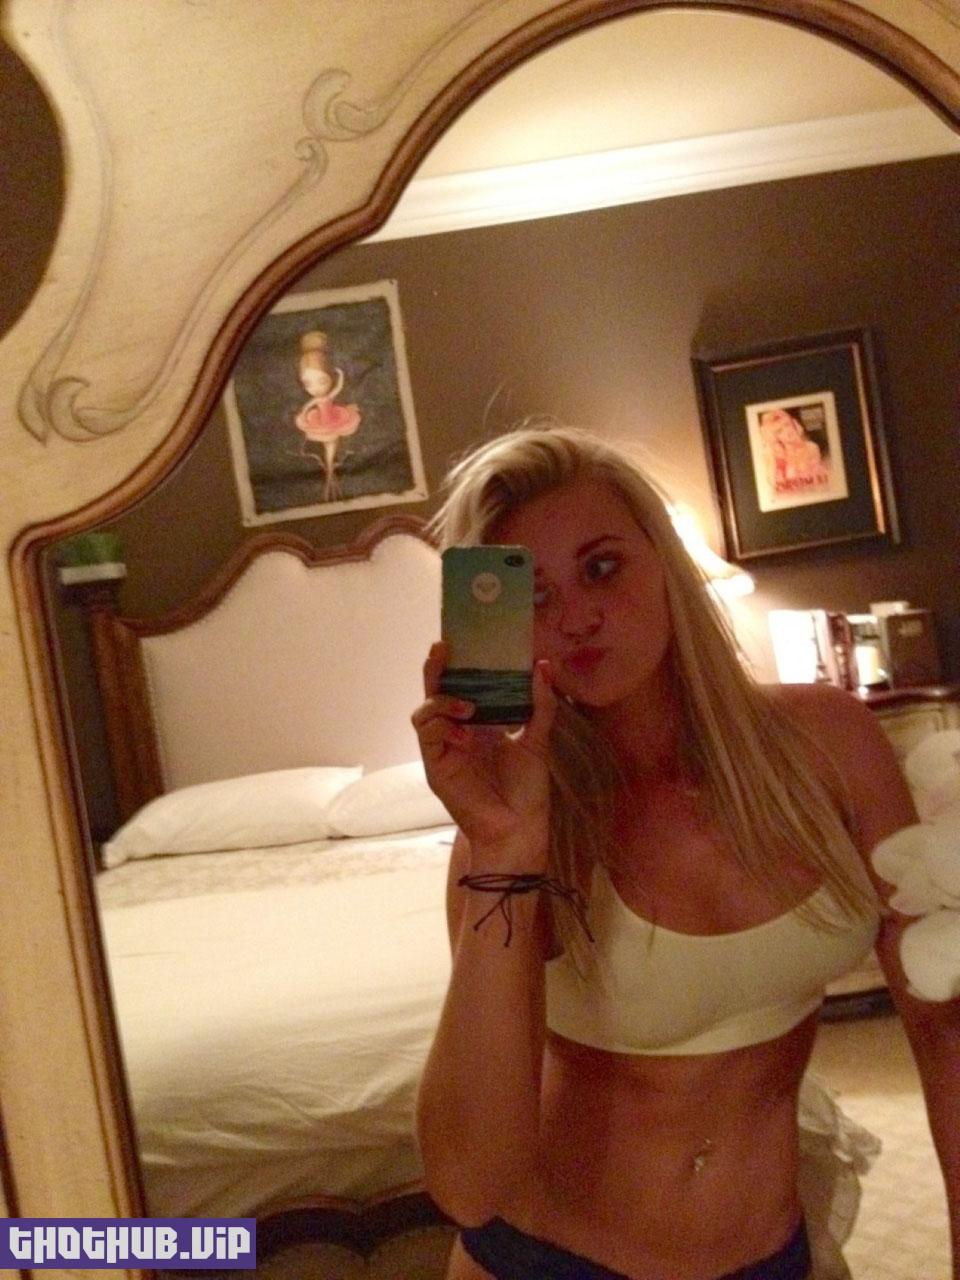 AJ Michalka Nude Photos Leaked from iCloud The Fappening